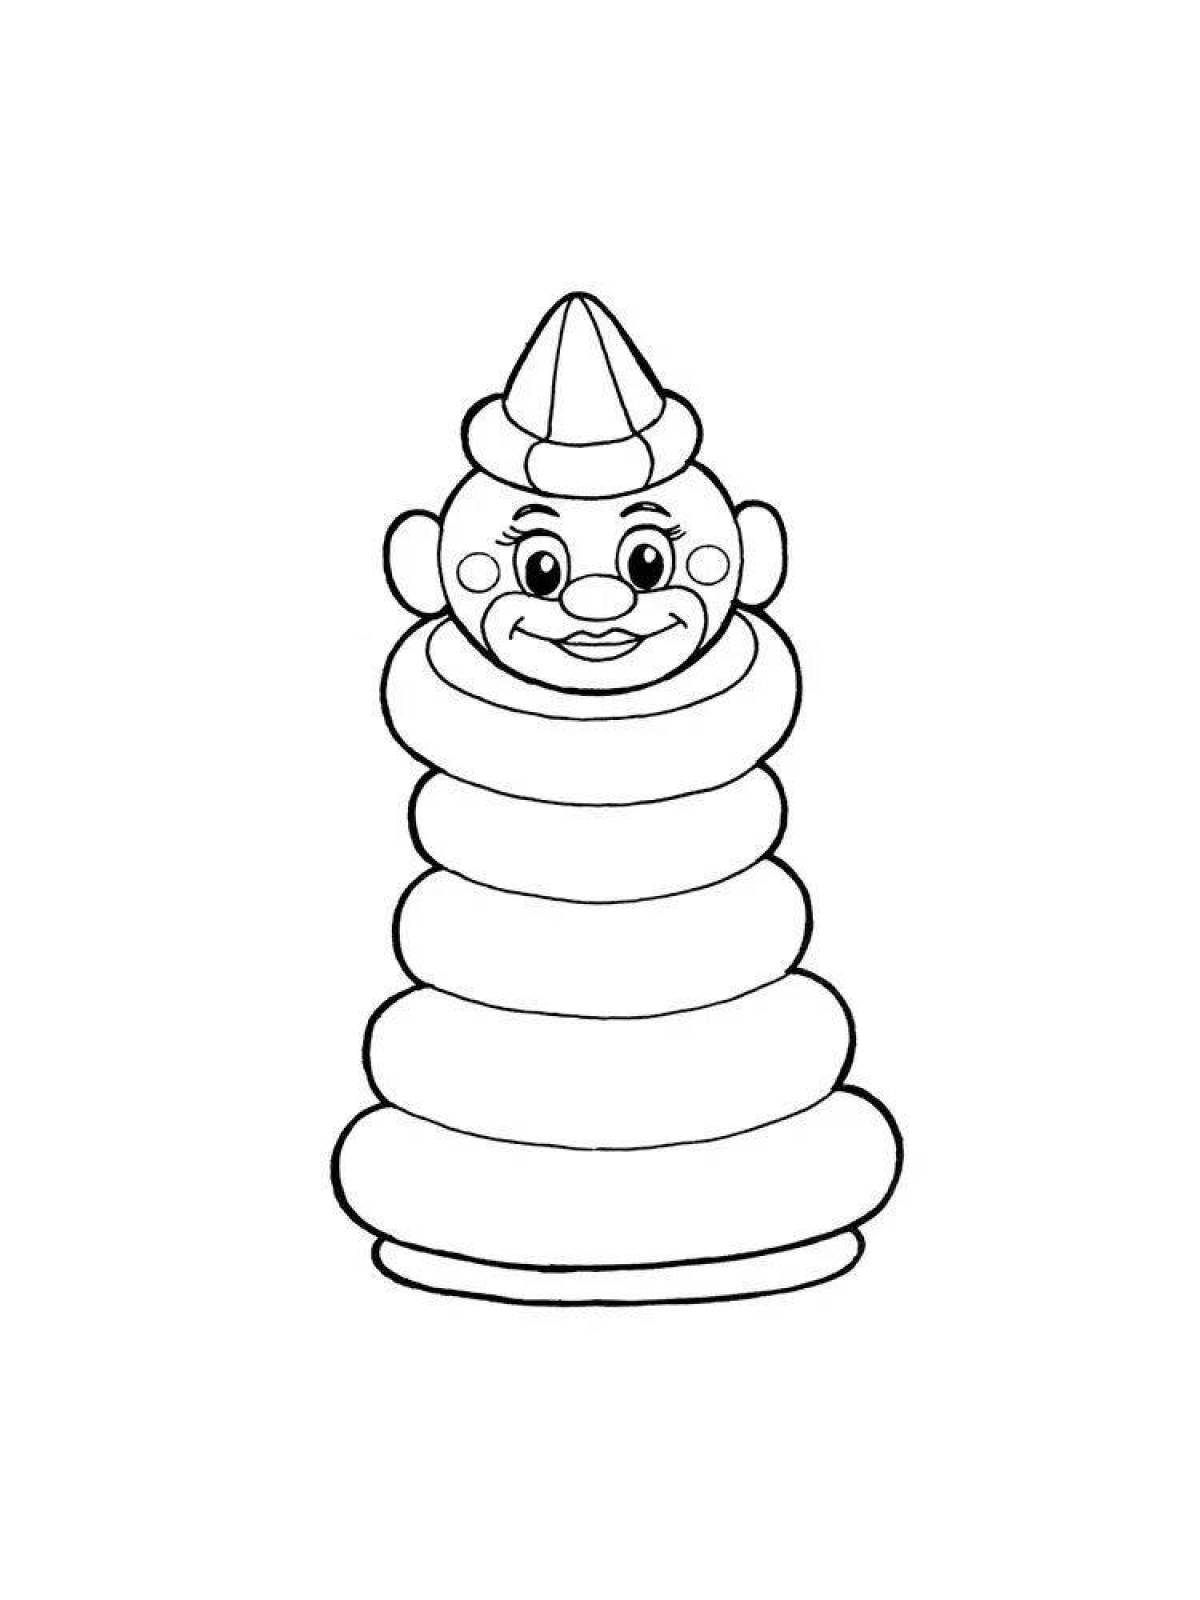 Creative pyramid coloring book for kids